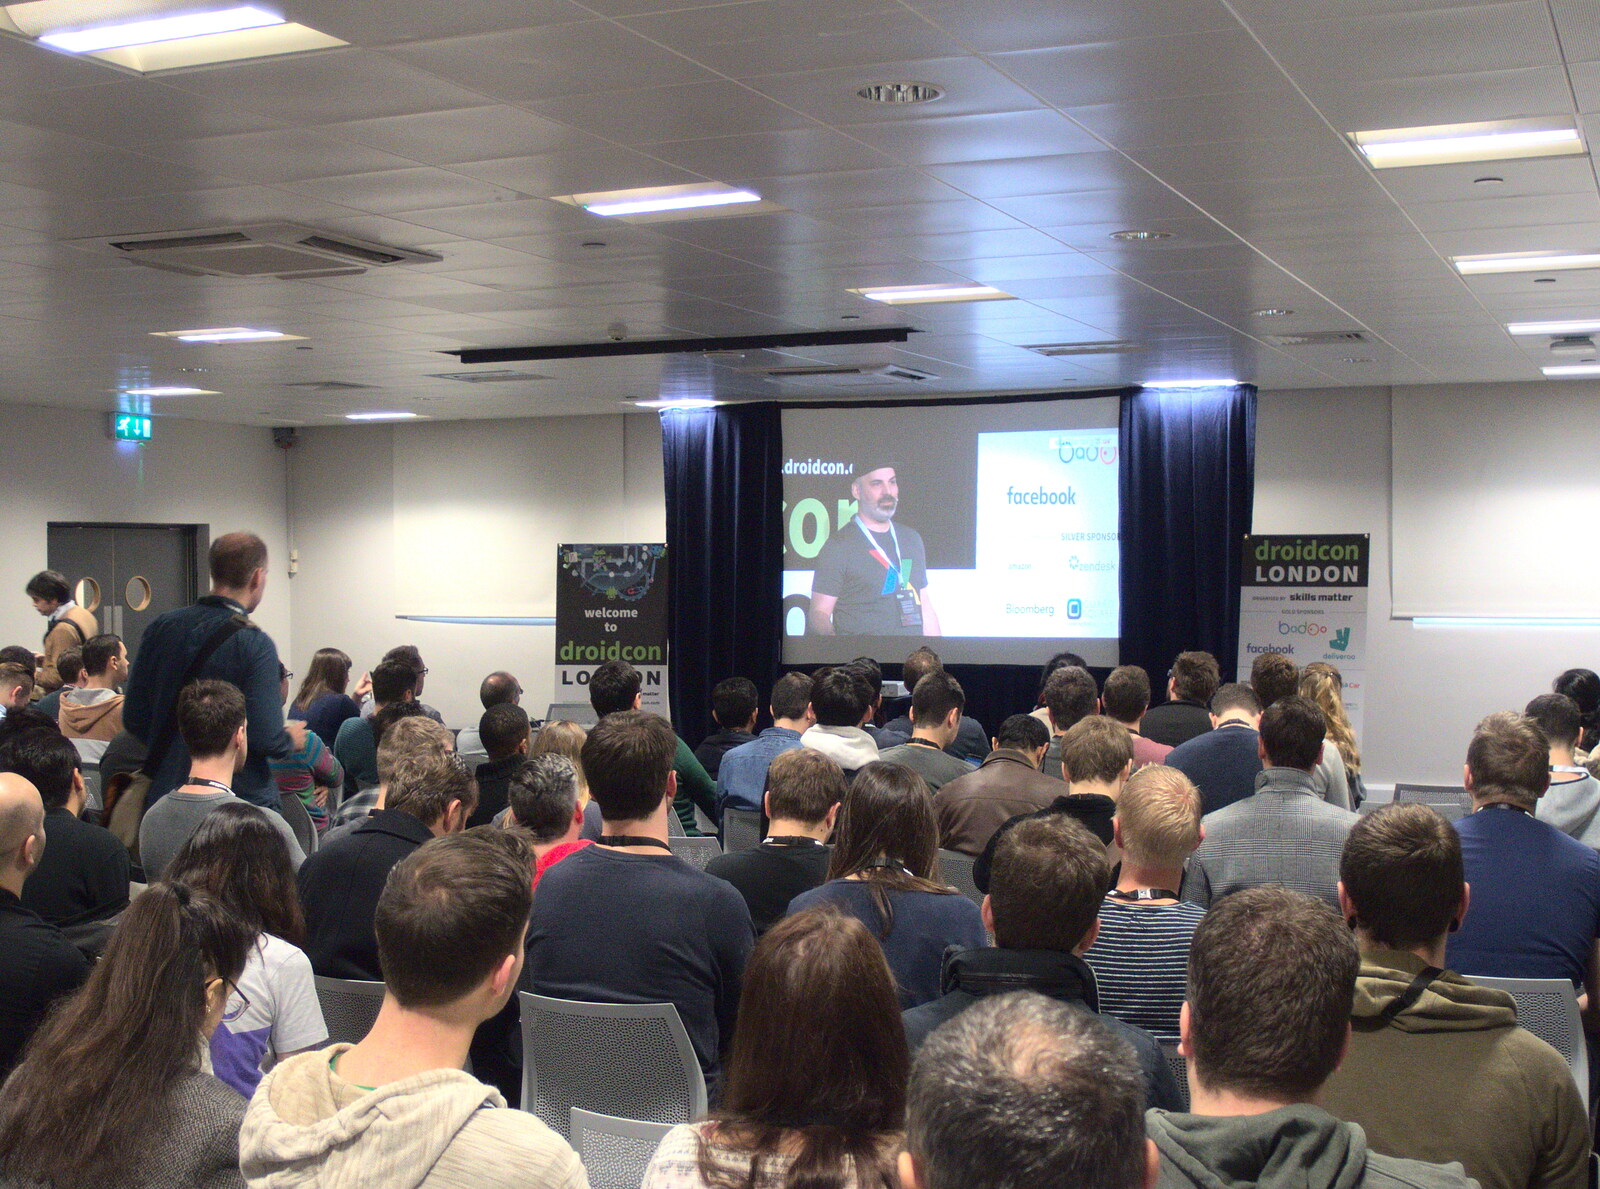 There's an Android-ey presentation from Droidcon 2016, Islington, London - 27th October 2016